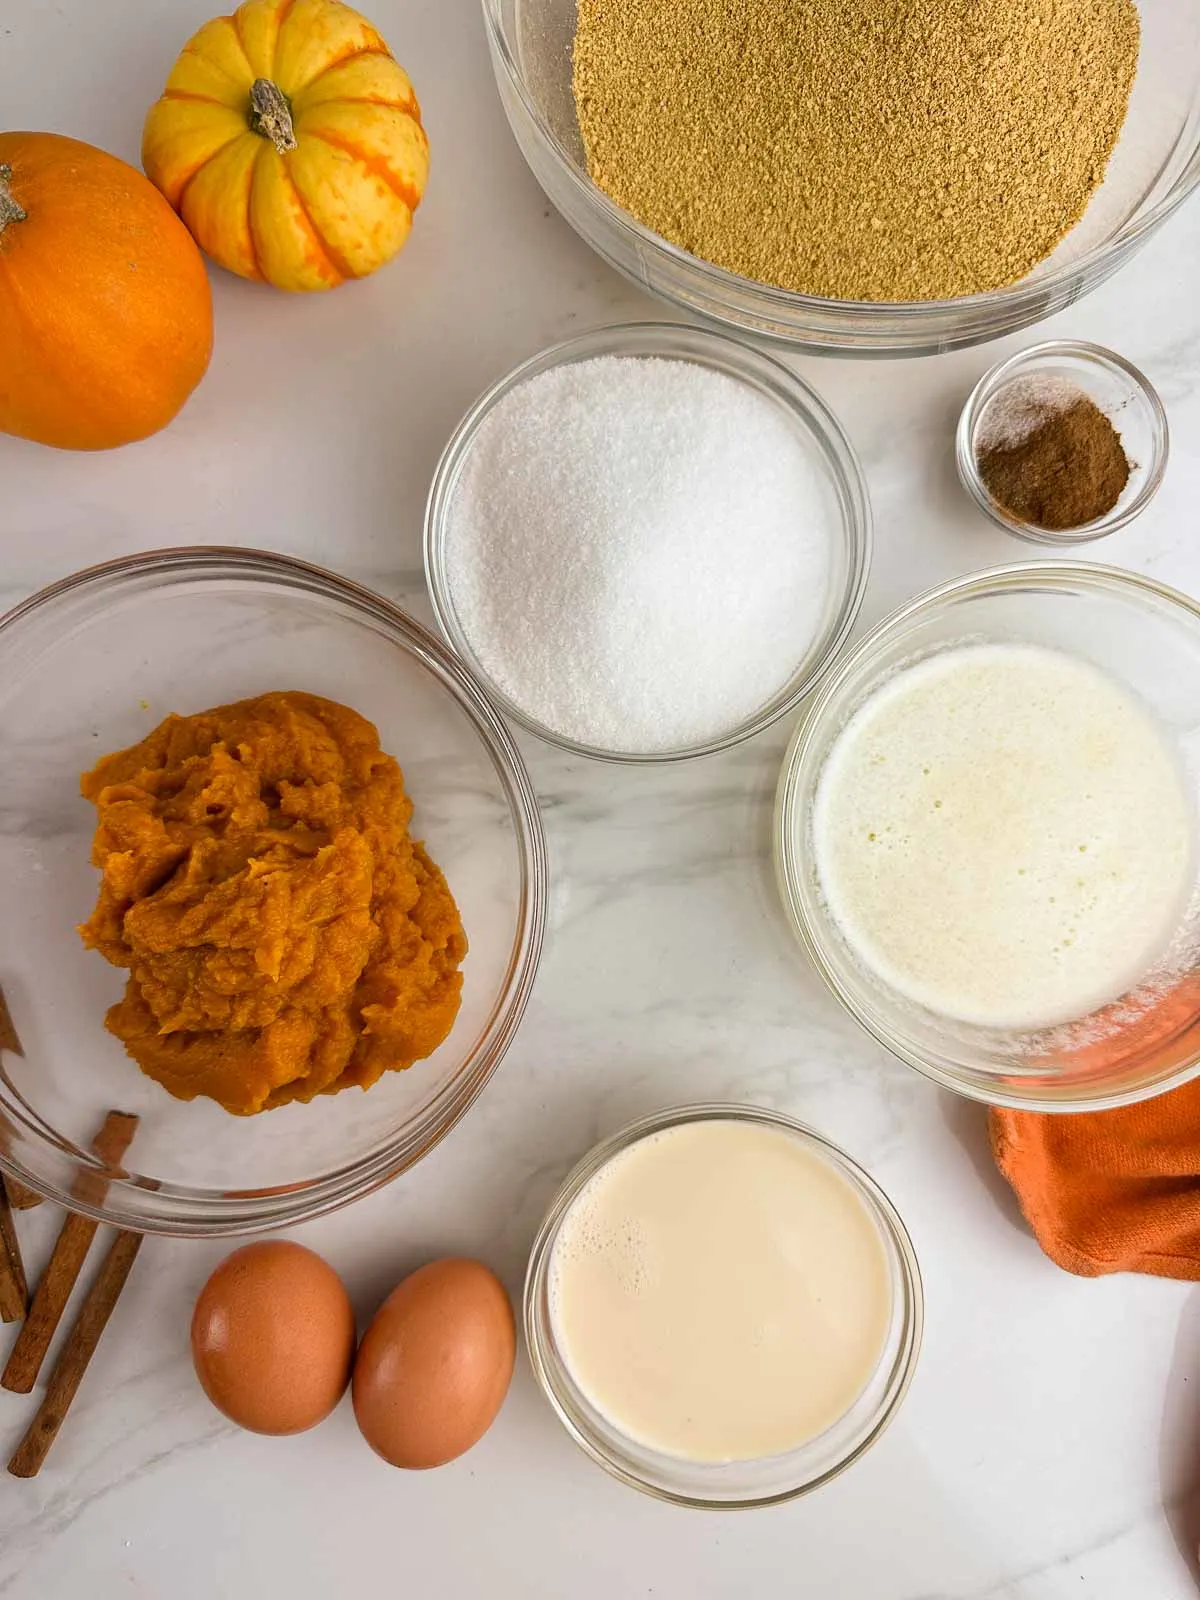 Ingredients for pumpkin pie with a graham cracker crust: graham cracker crumbs, sugar, spices, melted butter, pumpkin, evaporated milk, and eggs